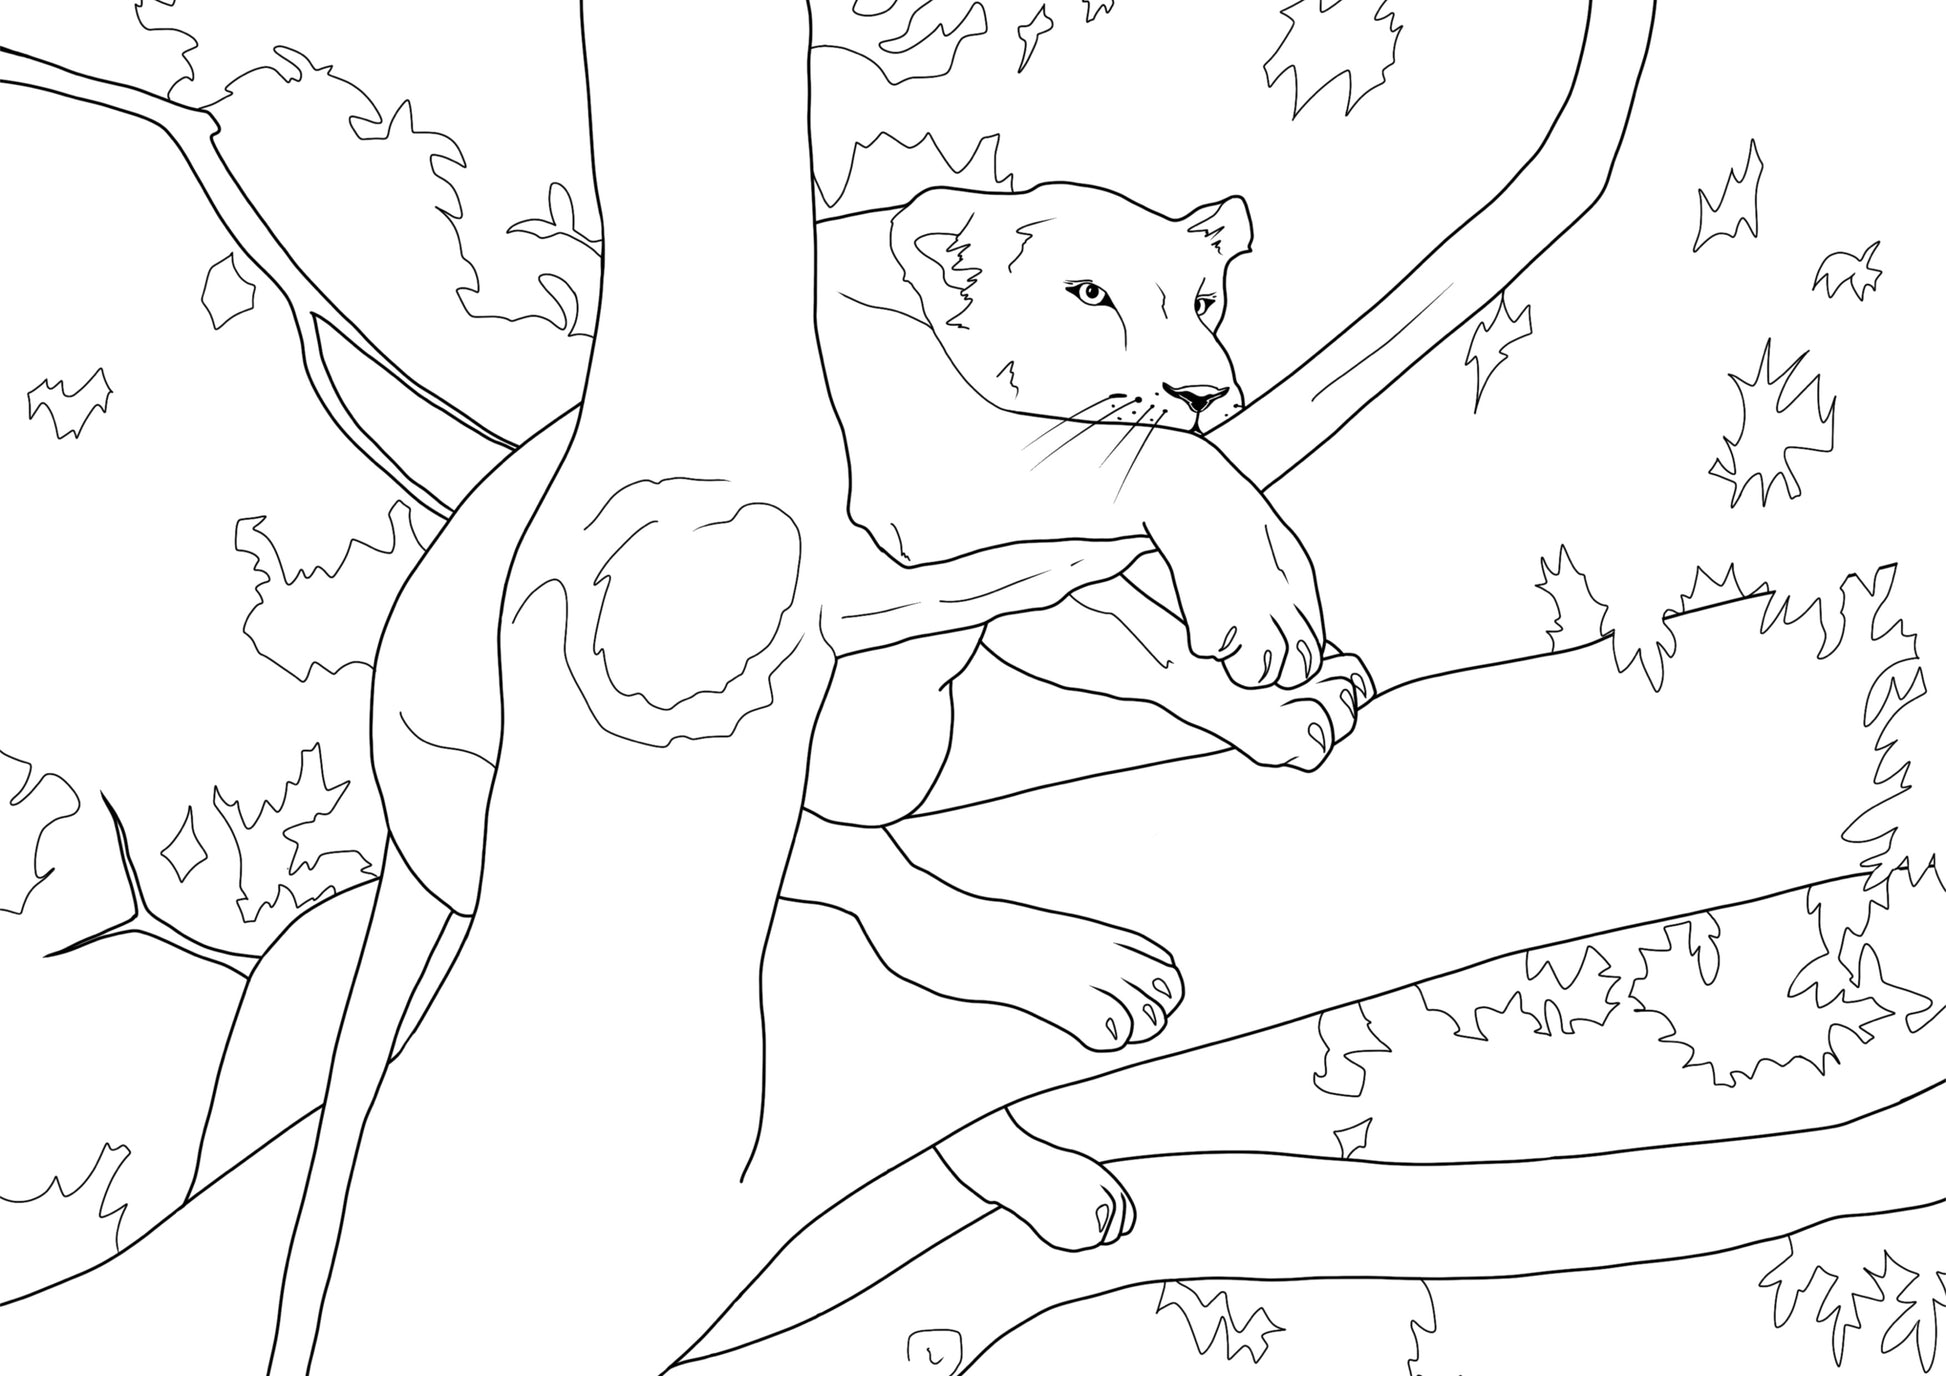 Line drawing of a young lioness resting in an overhead tree-top. One of the famous tree-climbing lions of Queen Elizabeth National Park in Uganda.